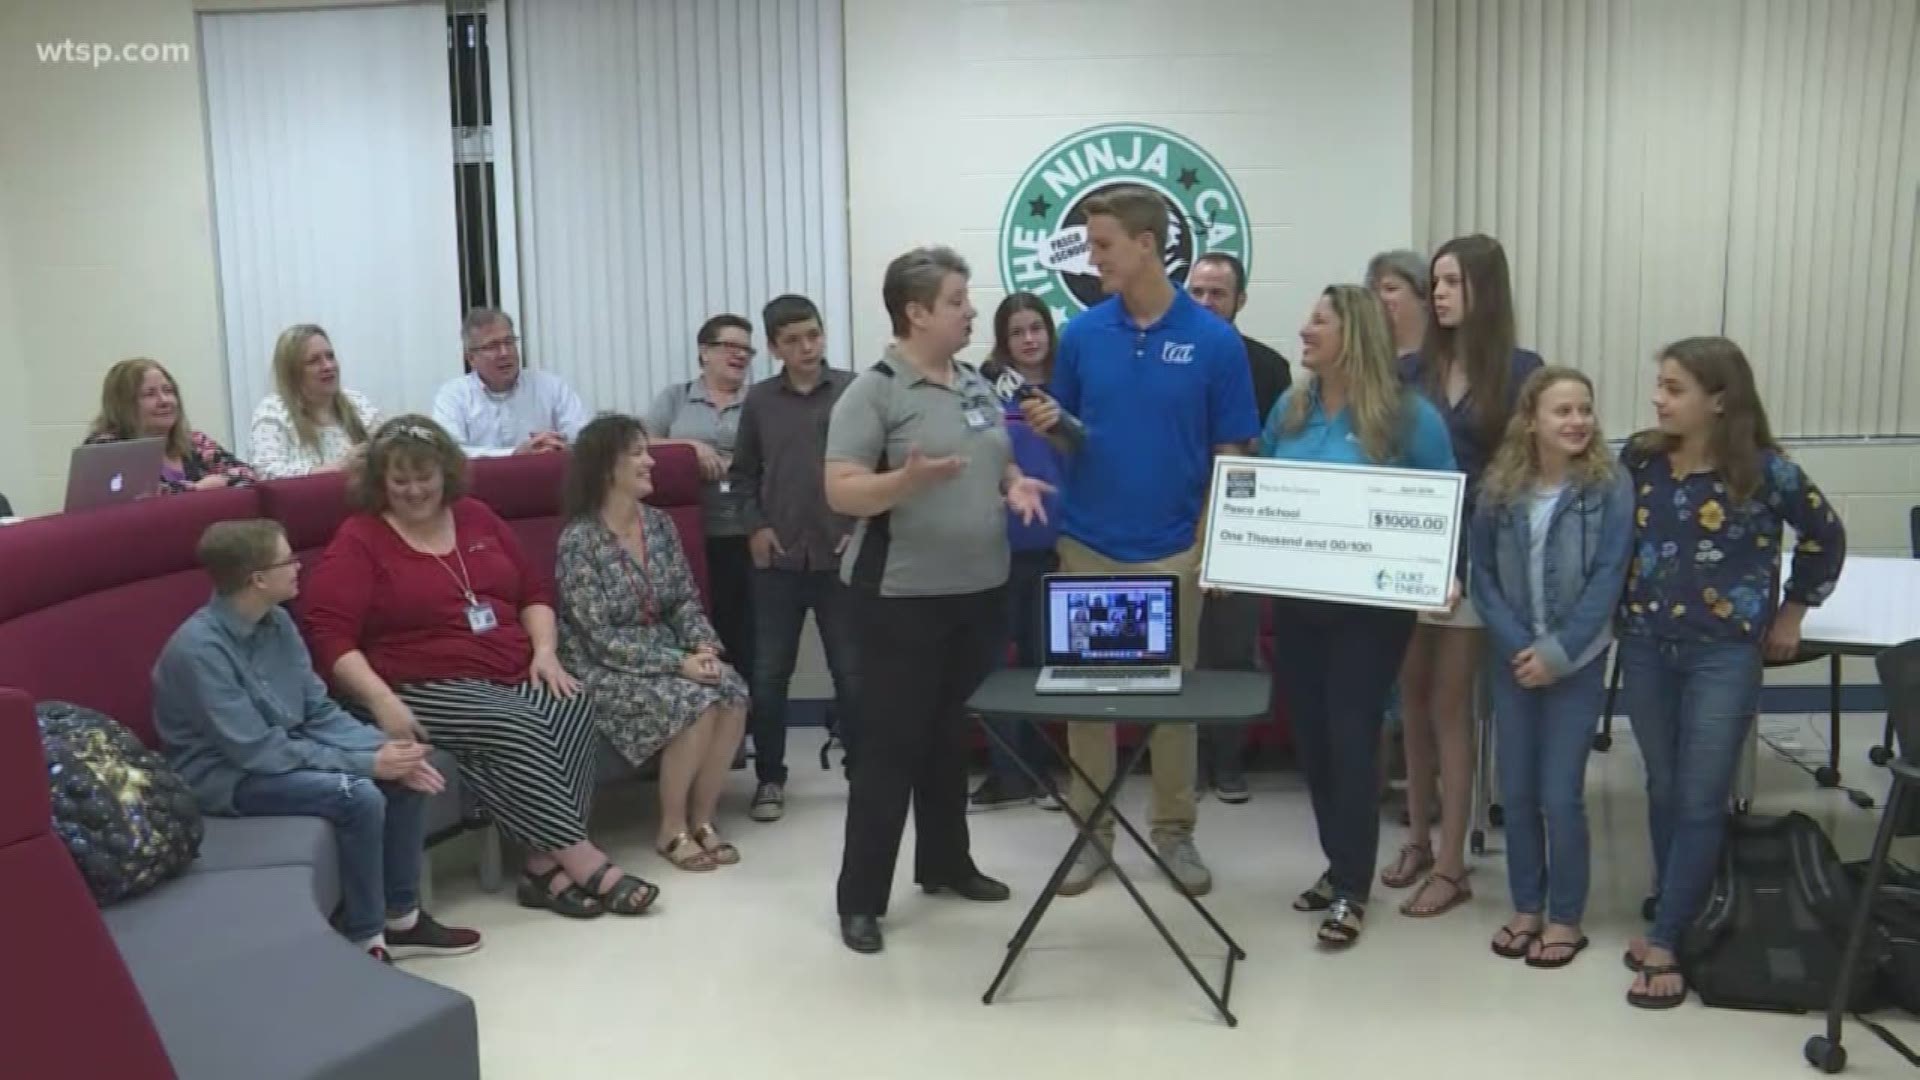 Duke Energy Florida presented a $1,000 check to Pasco eSchool for being named the 10News School of the Week powered by Duke Energy Florida. https://on.wtsp.com/2FQgXI9